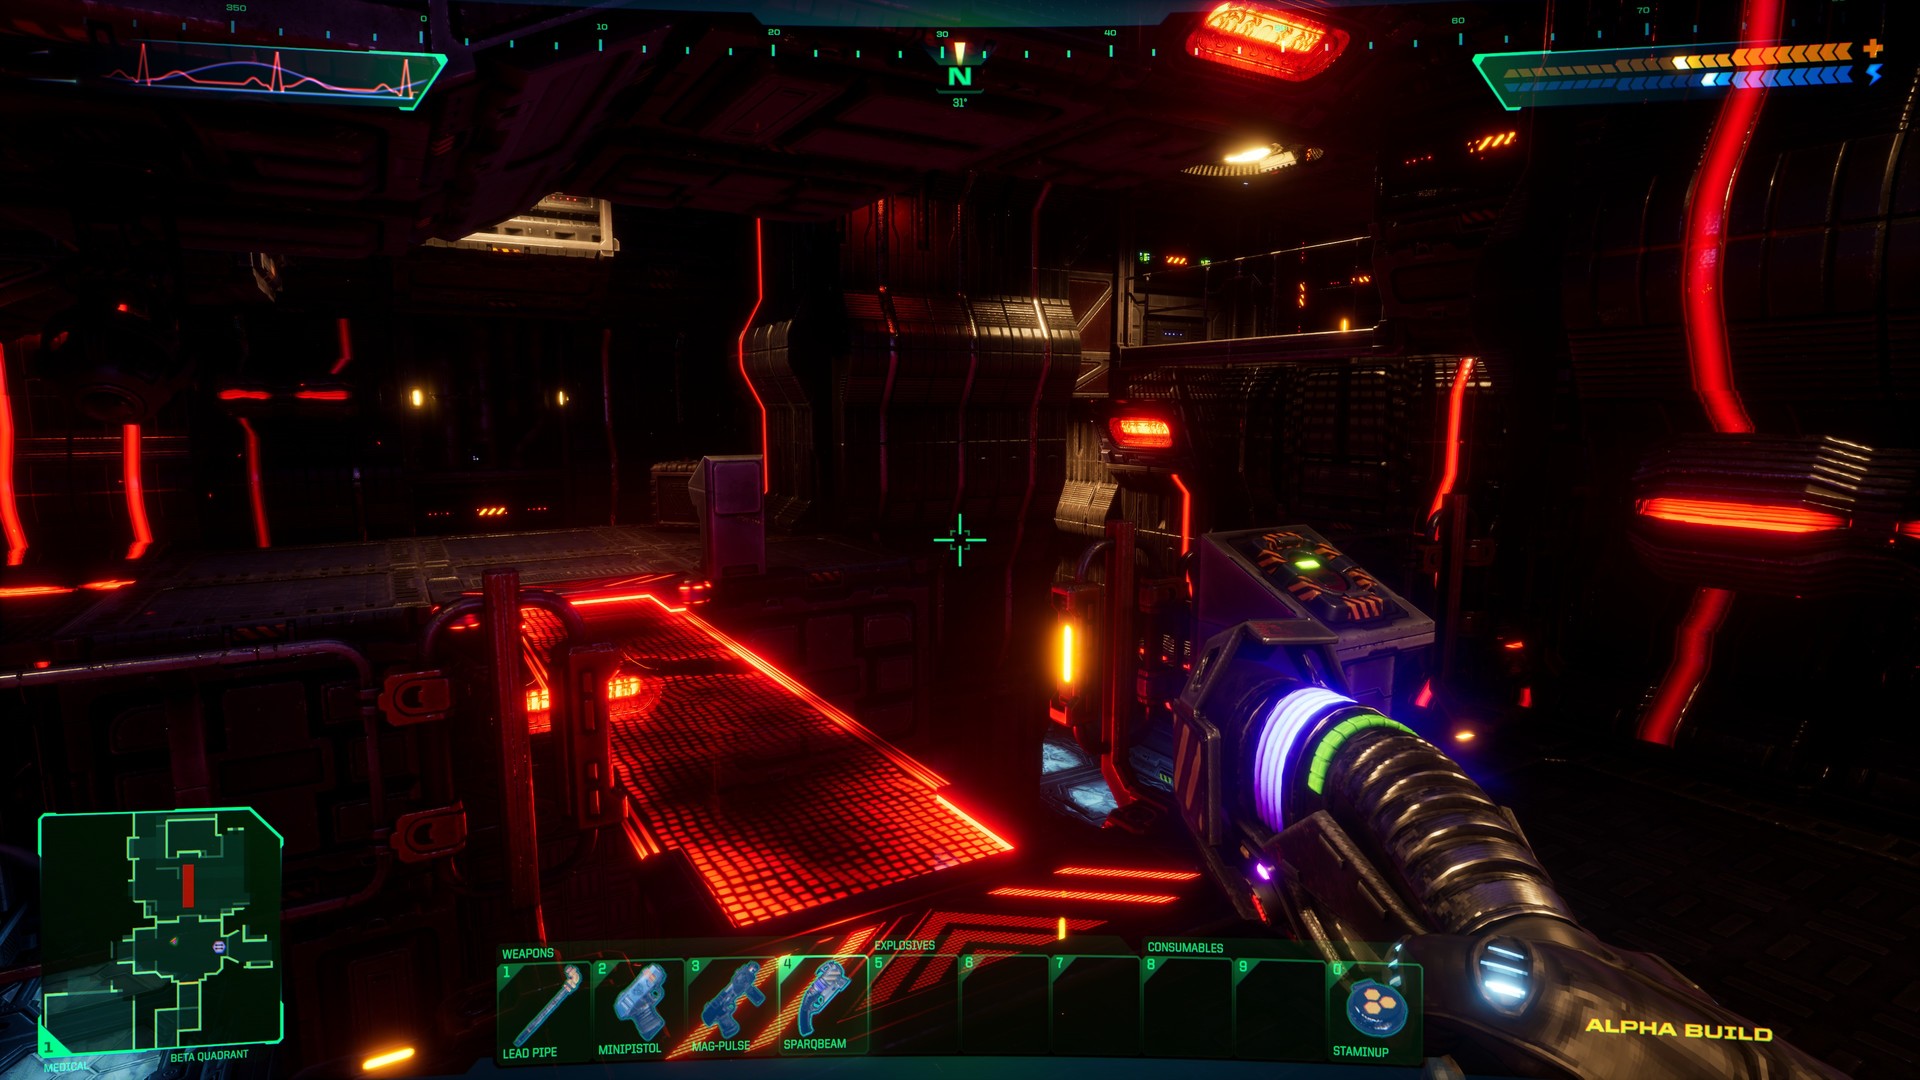 System Shock Remake Guide – Where To Find the Radiation Suit